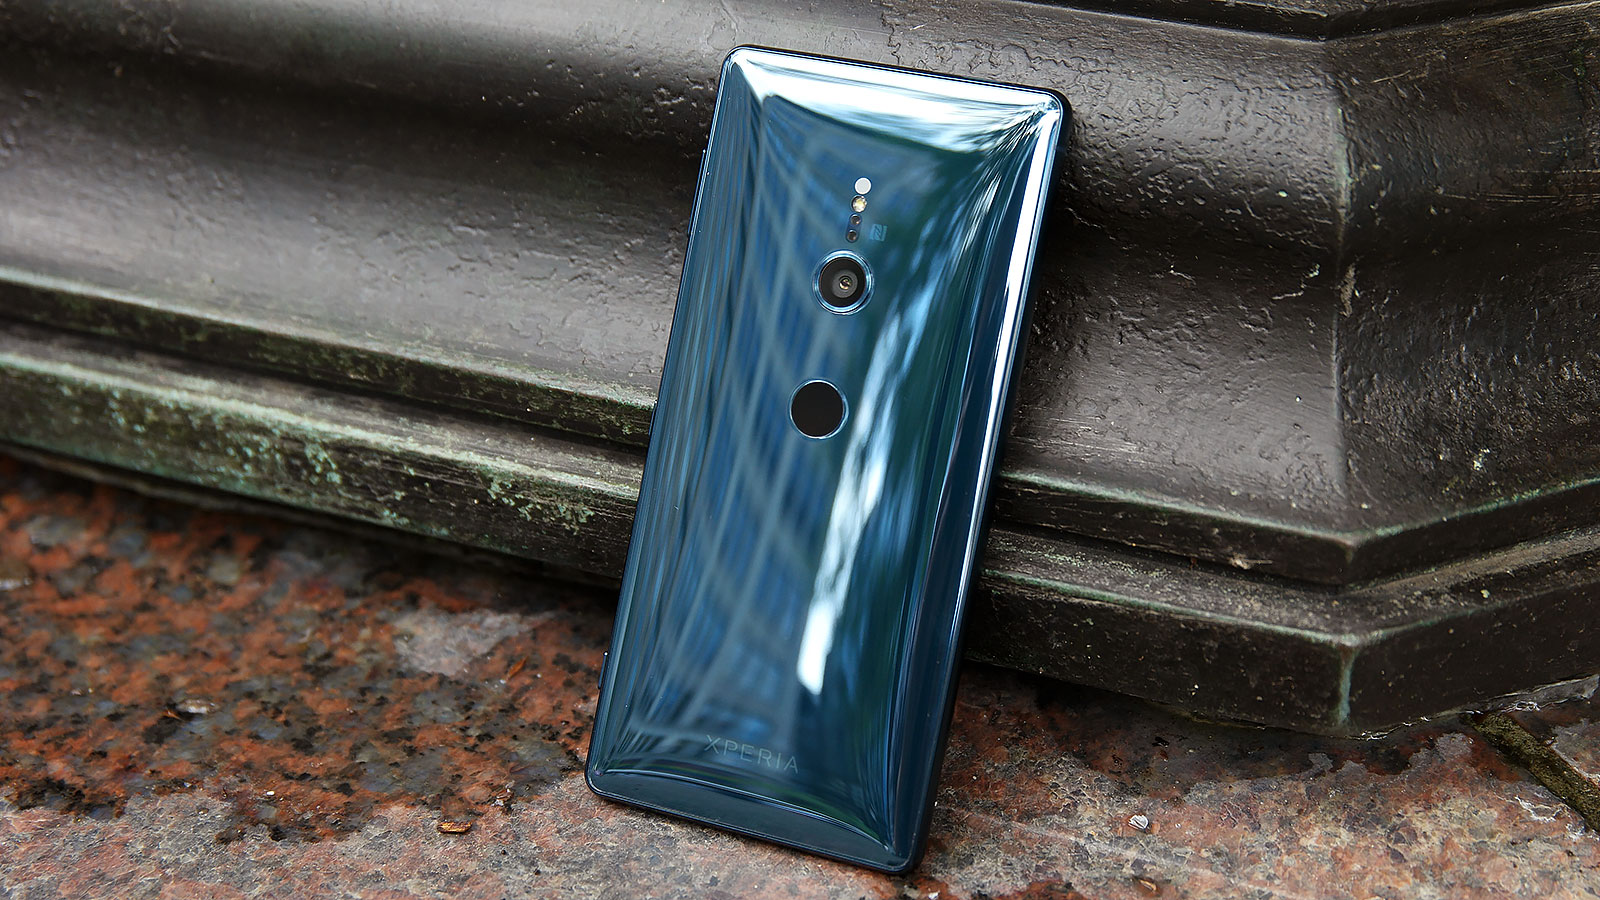 The Xperia XZ2 Is The Best Phone Sony Has Made In Years